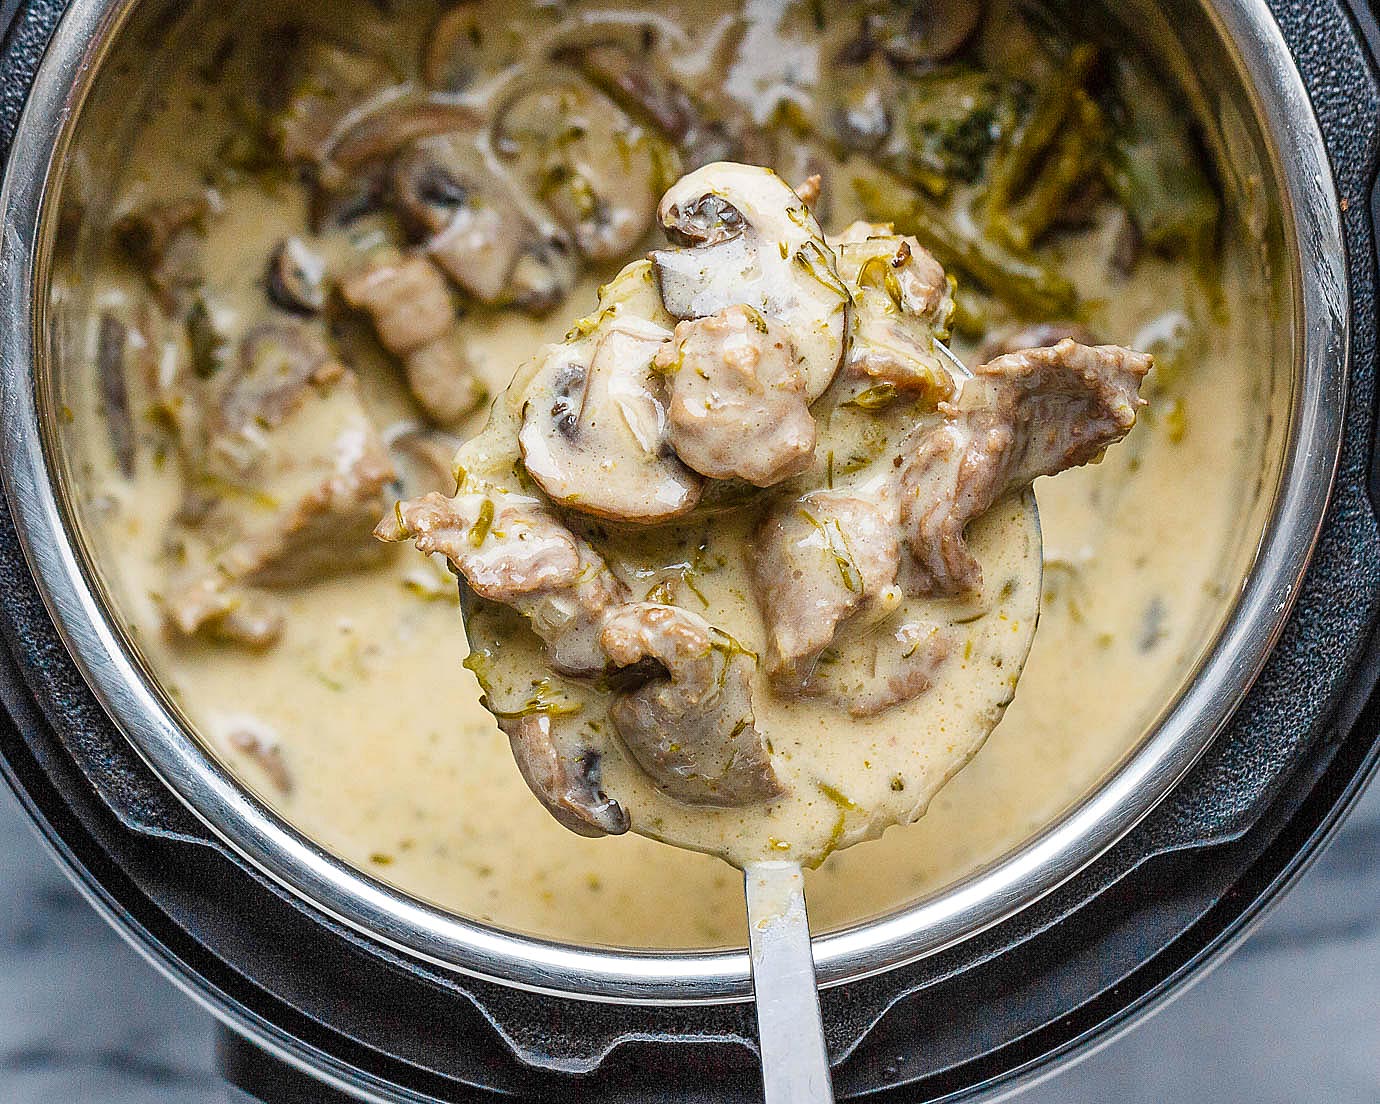 Instant Pot Creamy Beef with Mushroom, Cream Cheese and Broccoli